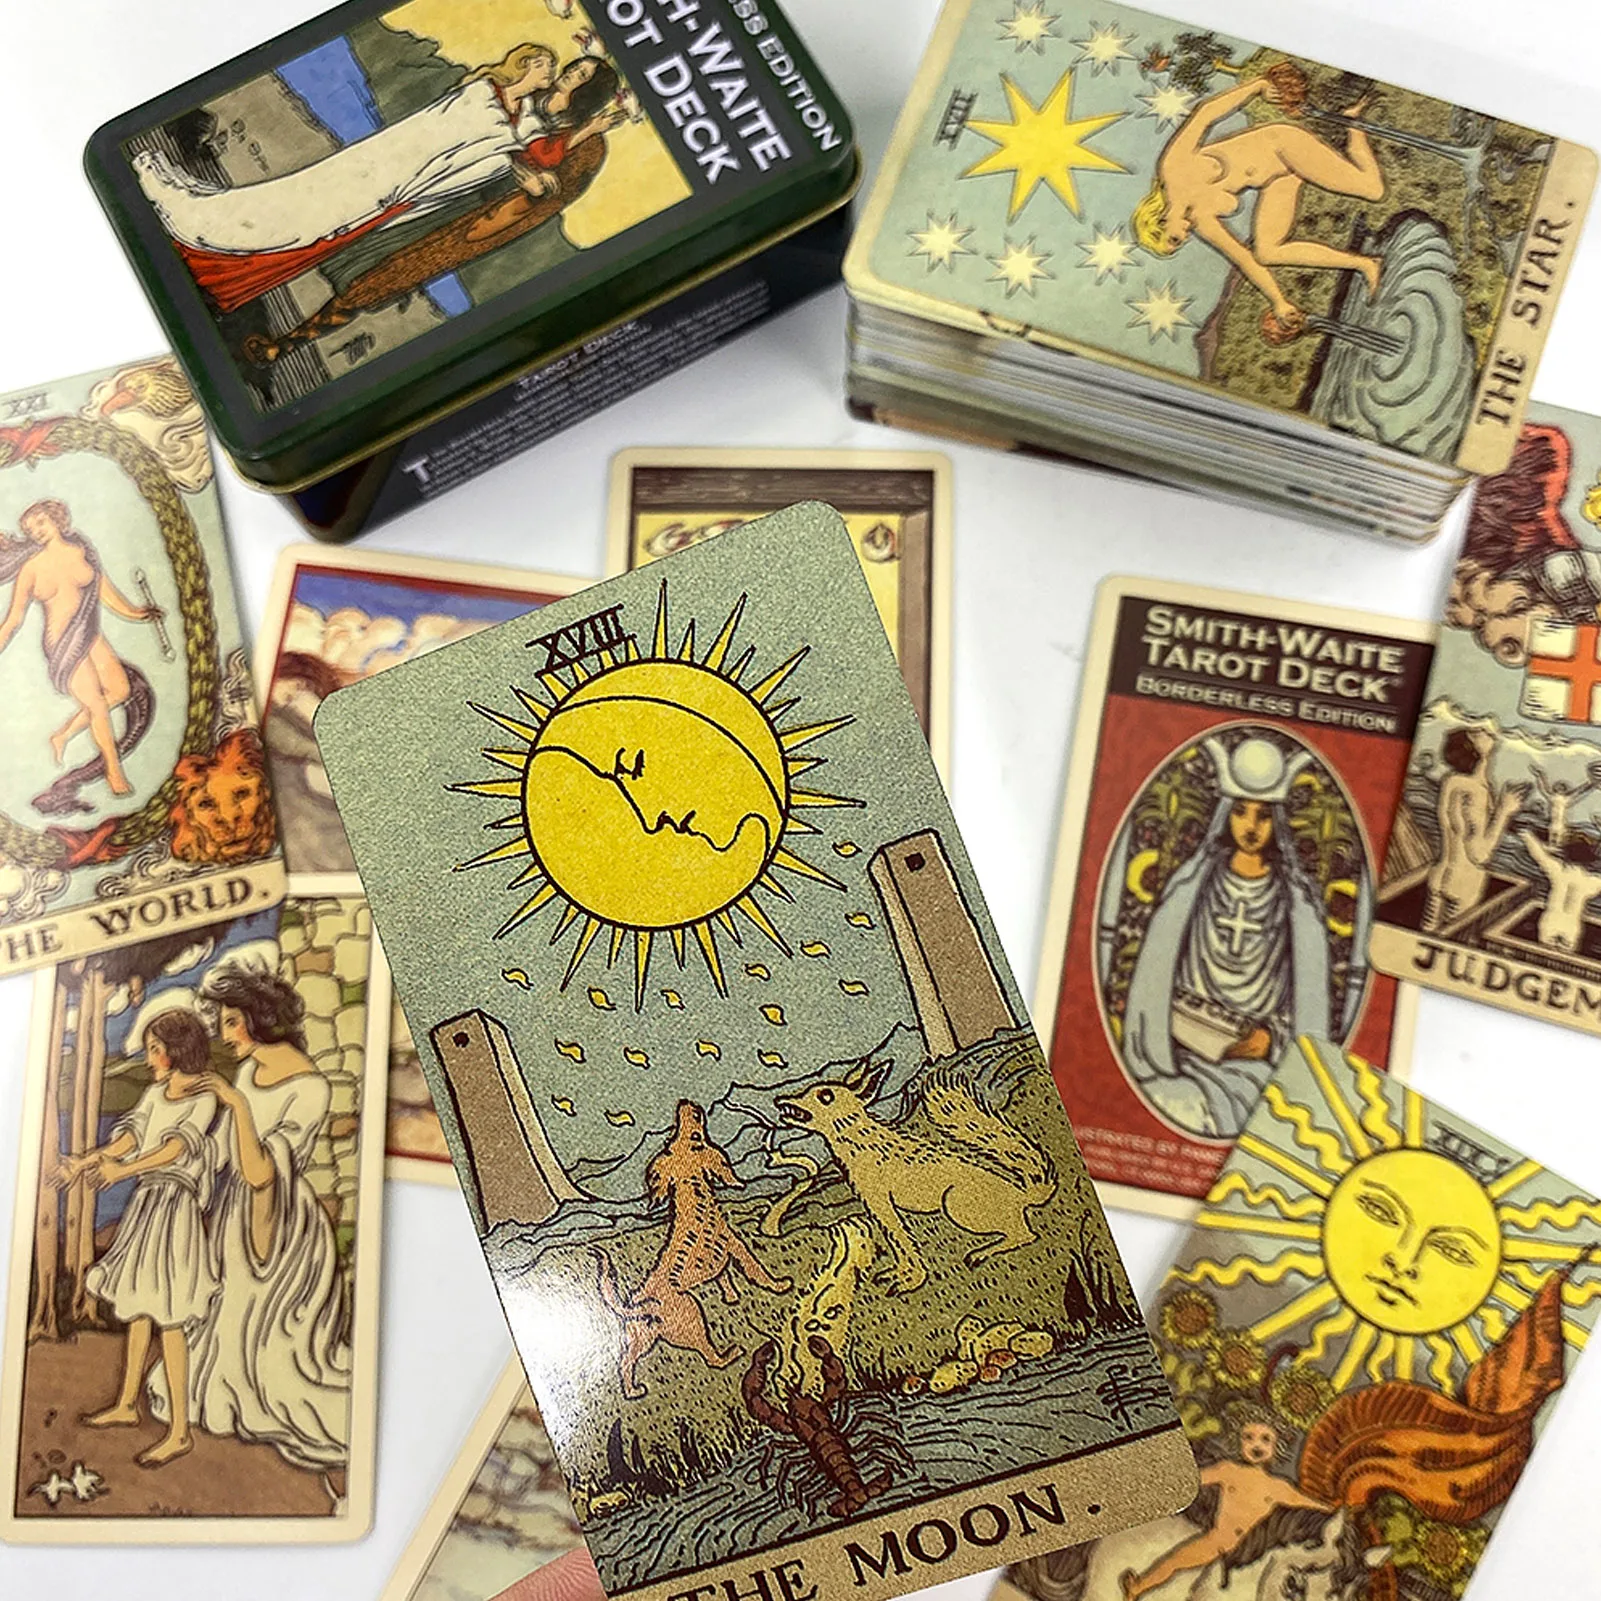 

Smith-Waite Tarot Deck Boardless Edition English Tarot Card For Divination Oracle Card Board Game For Adult Board Game 78 Sheets